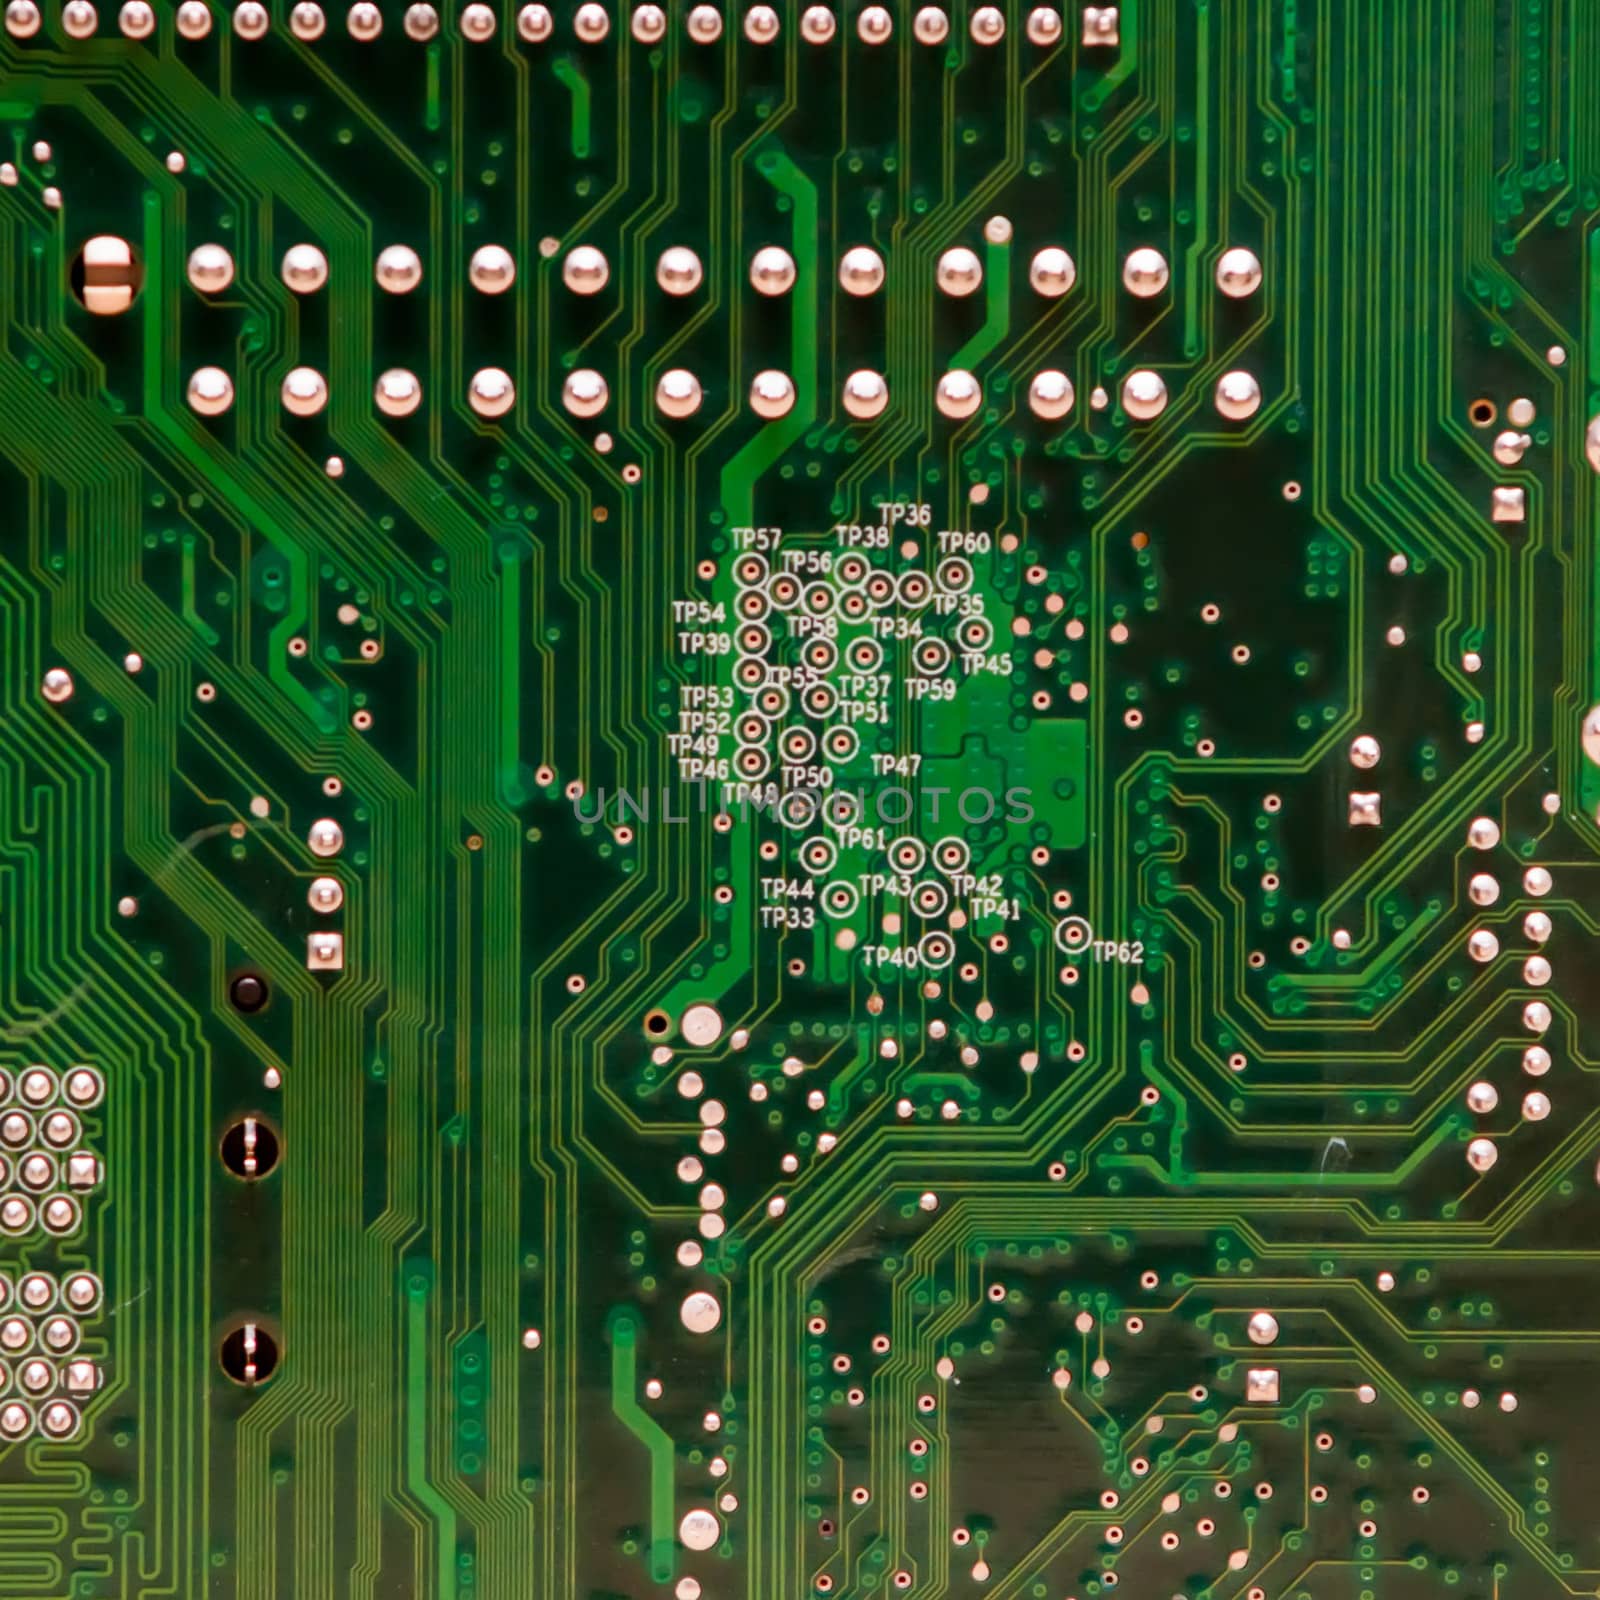 circuit board background of computer motherboard and electronics